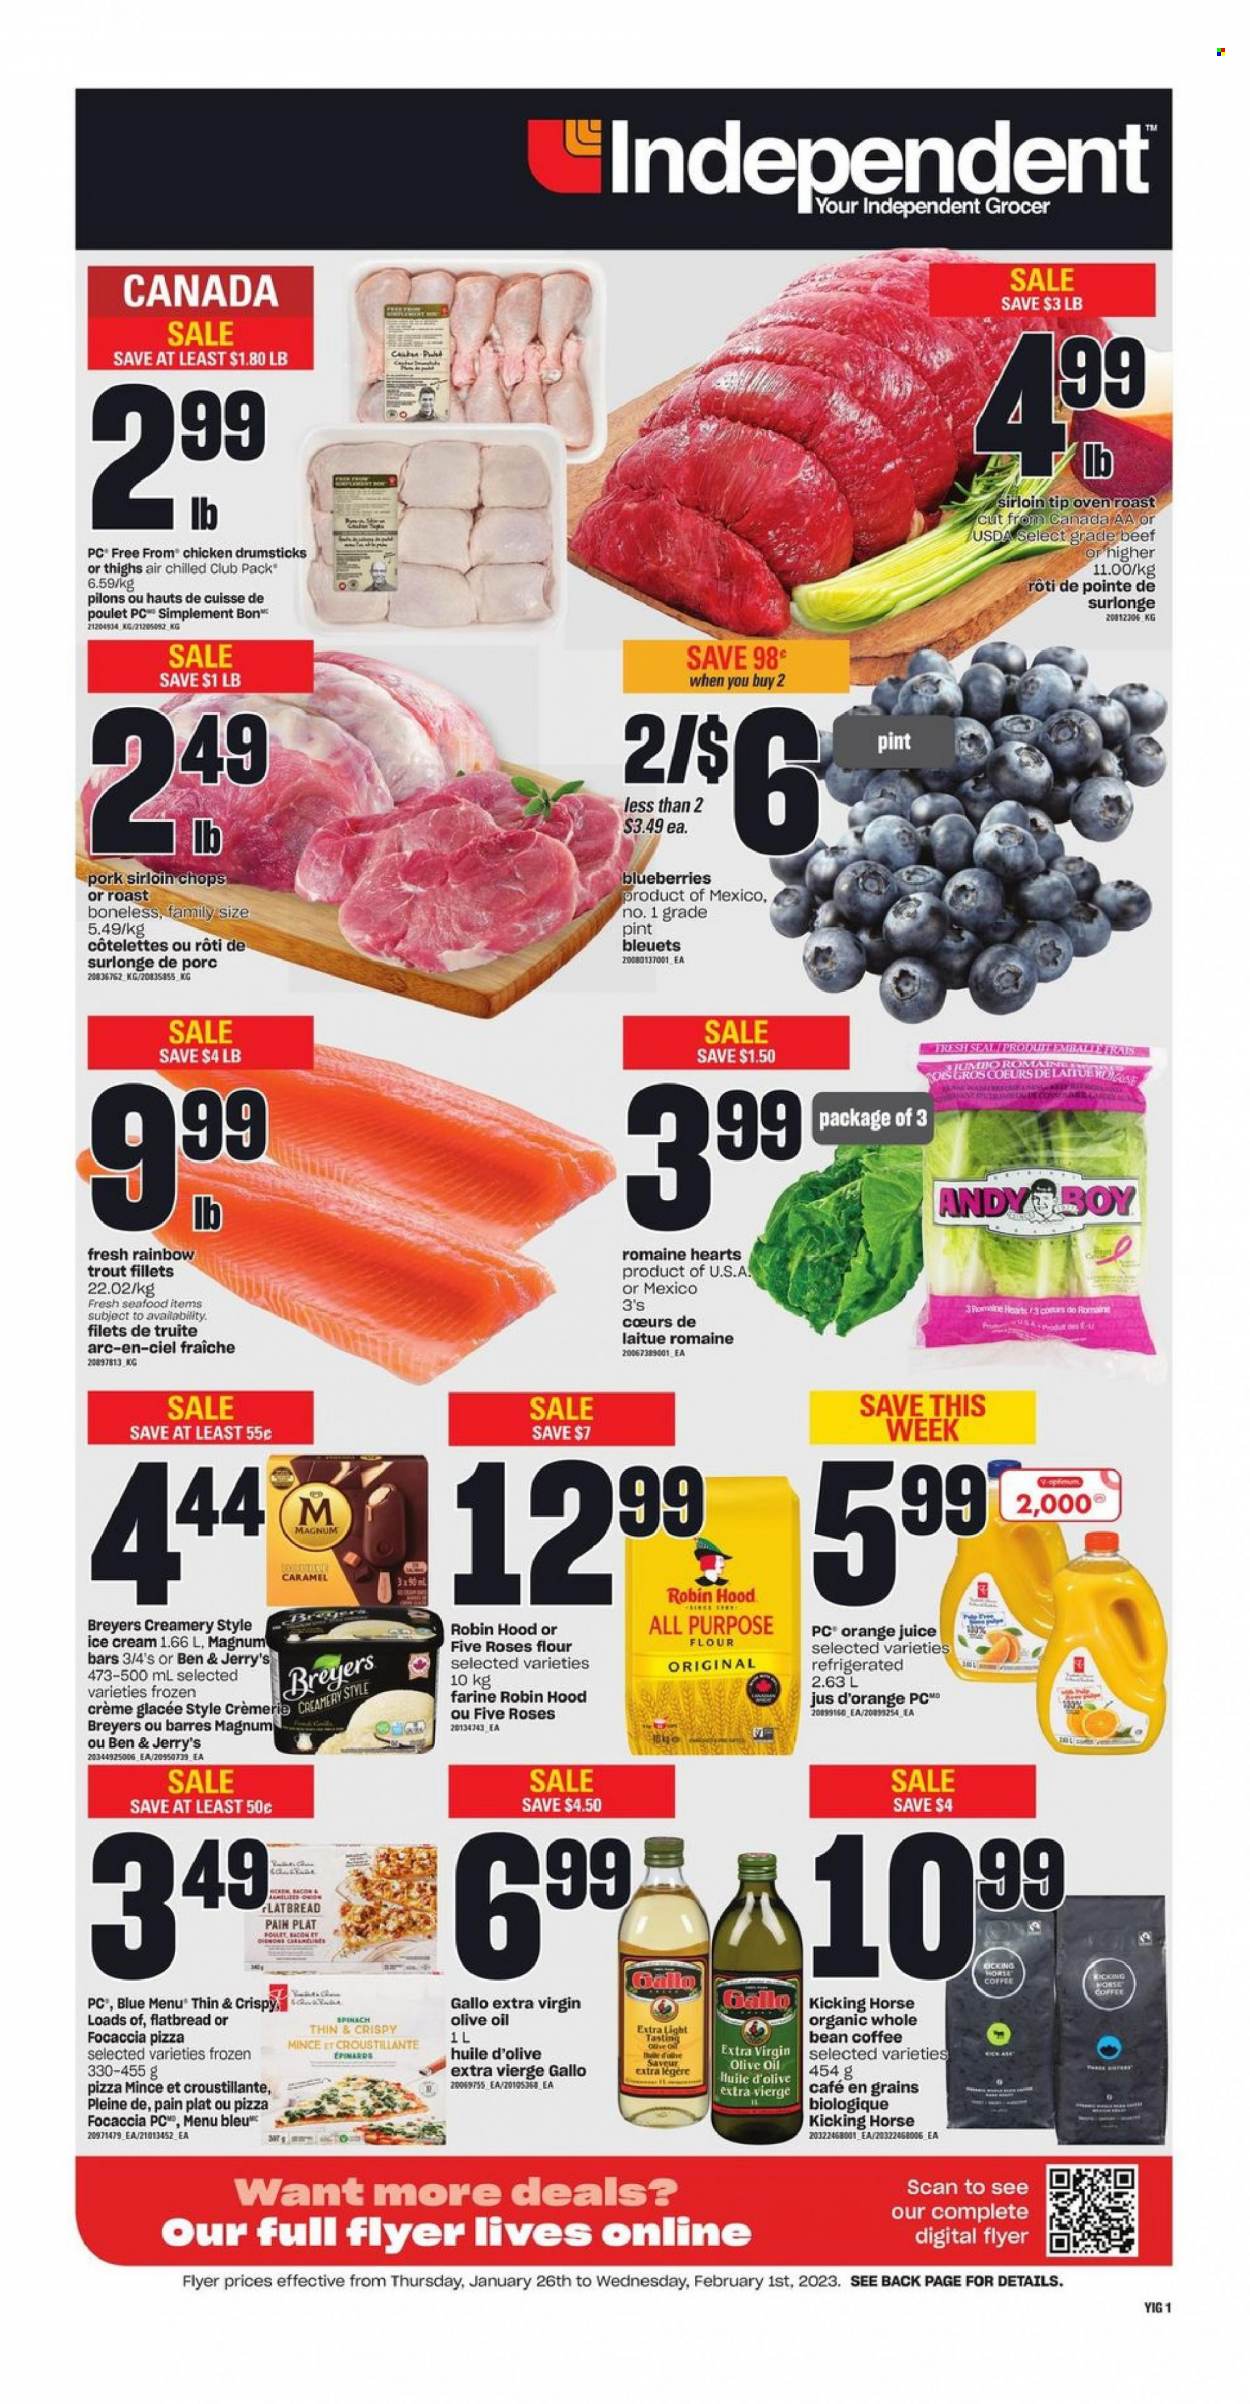 thumbnail - Independent Flyer - January 26, 2023 - February 01, 2023 - Sales products - focaccia, flatbread, onion, blueberries, trout, seafood, pizza, bacon, Magnum, ice cream, Ben & Jerry's, all purpose flour, flour, extra virgin olive oil, olive oil, oil, orange juice, juice, coffee, chicken drumsticks, chicken, pork loin, Optimum. Page 1.